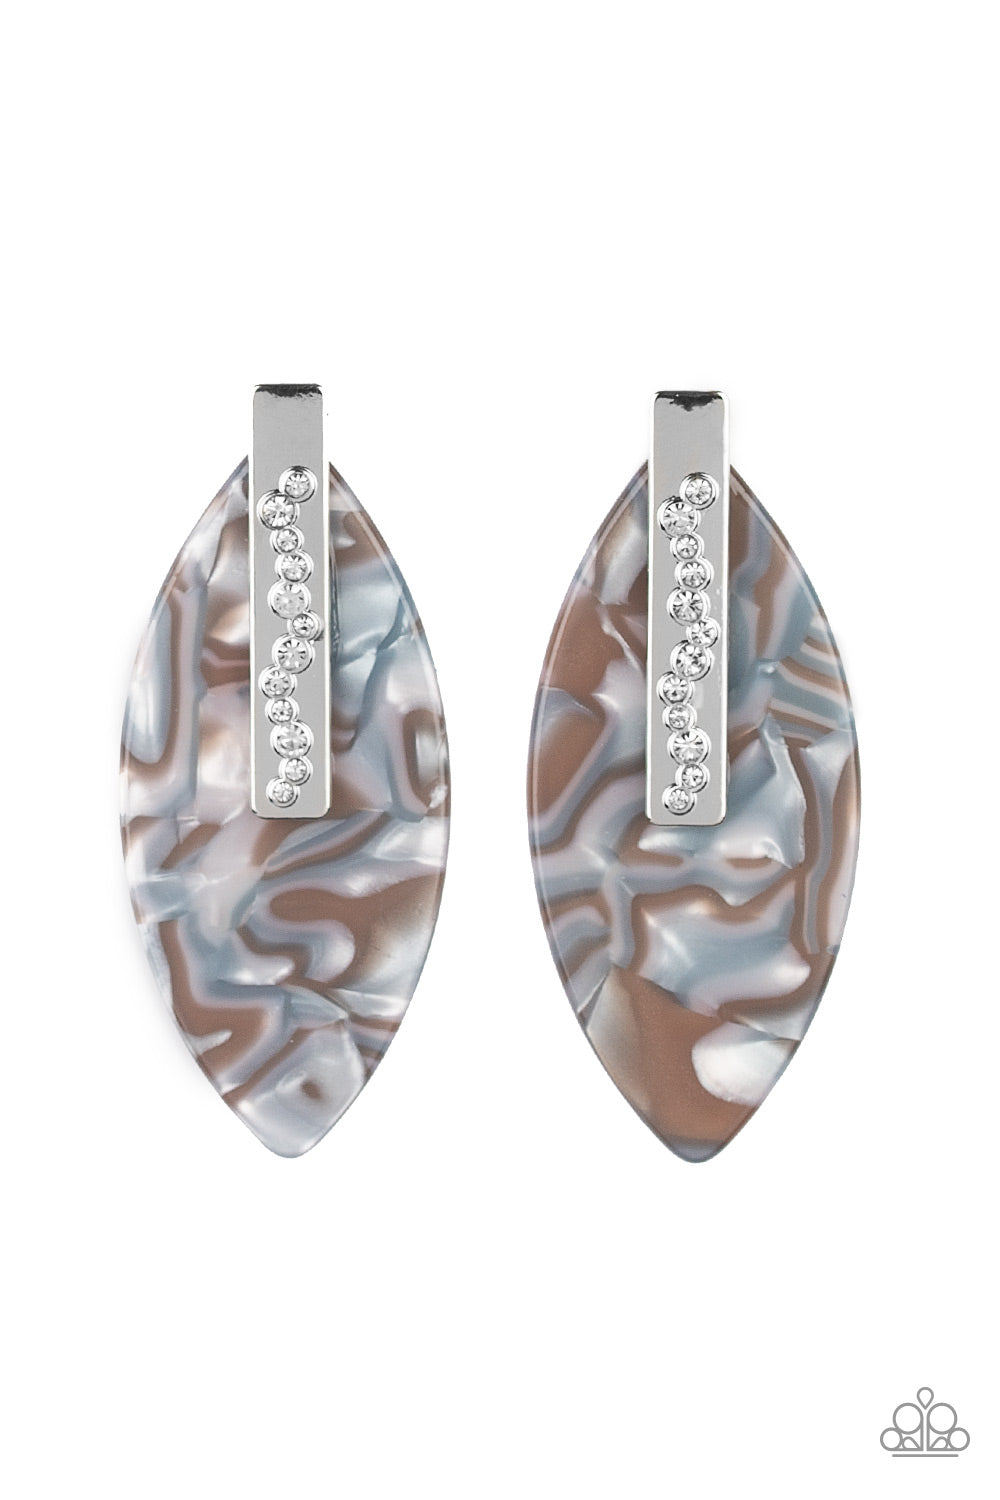 Maven Mantra - multi post earrings (August 2020 Life Of The Party)